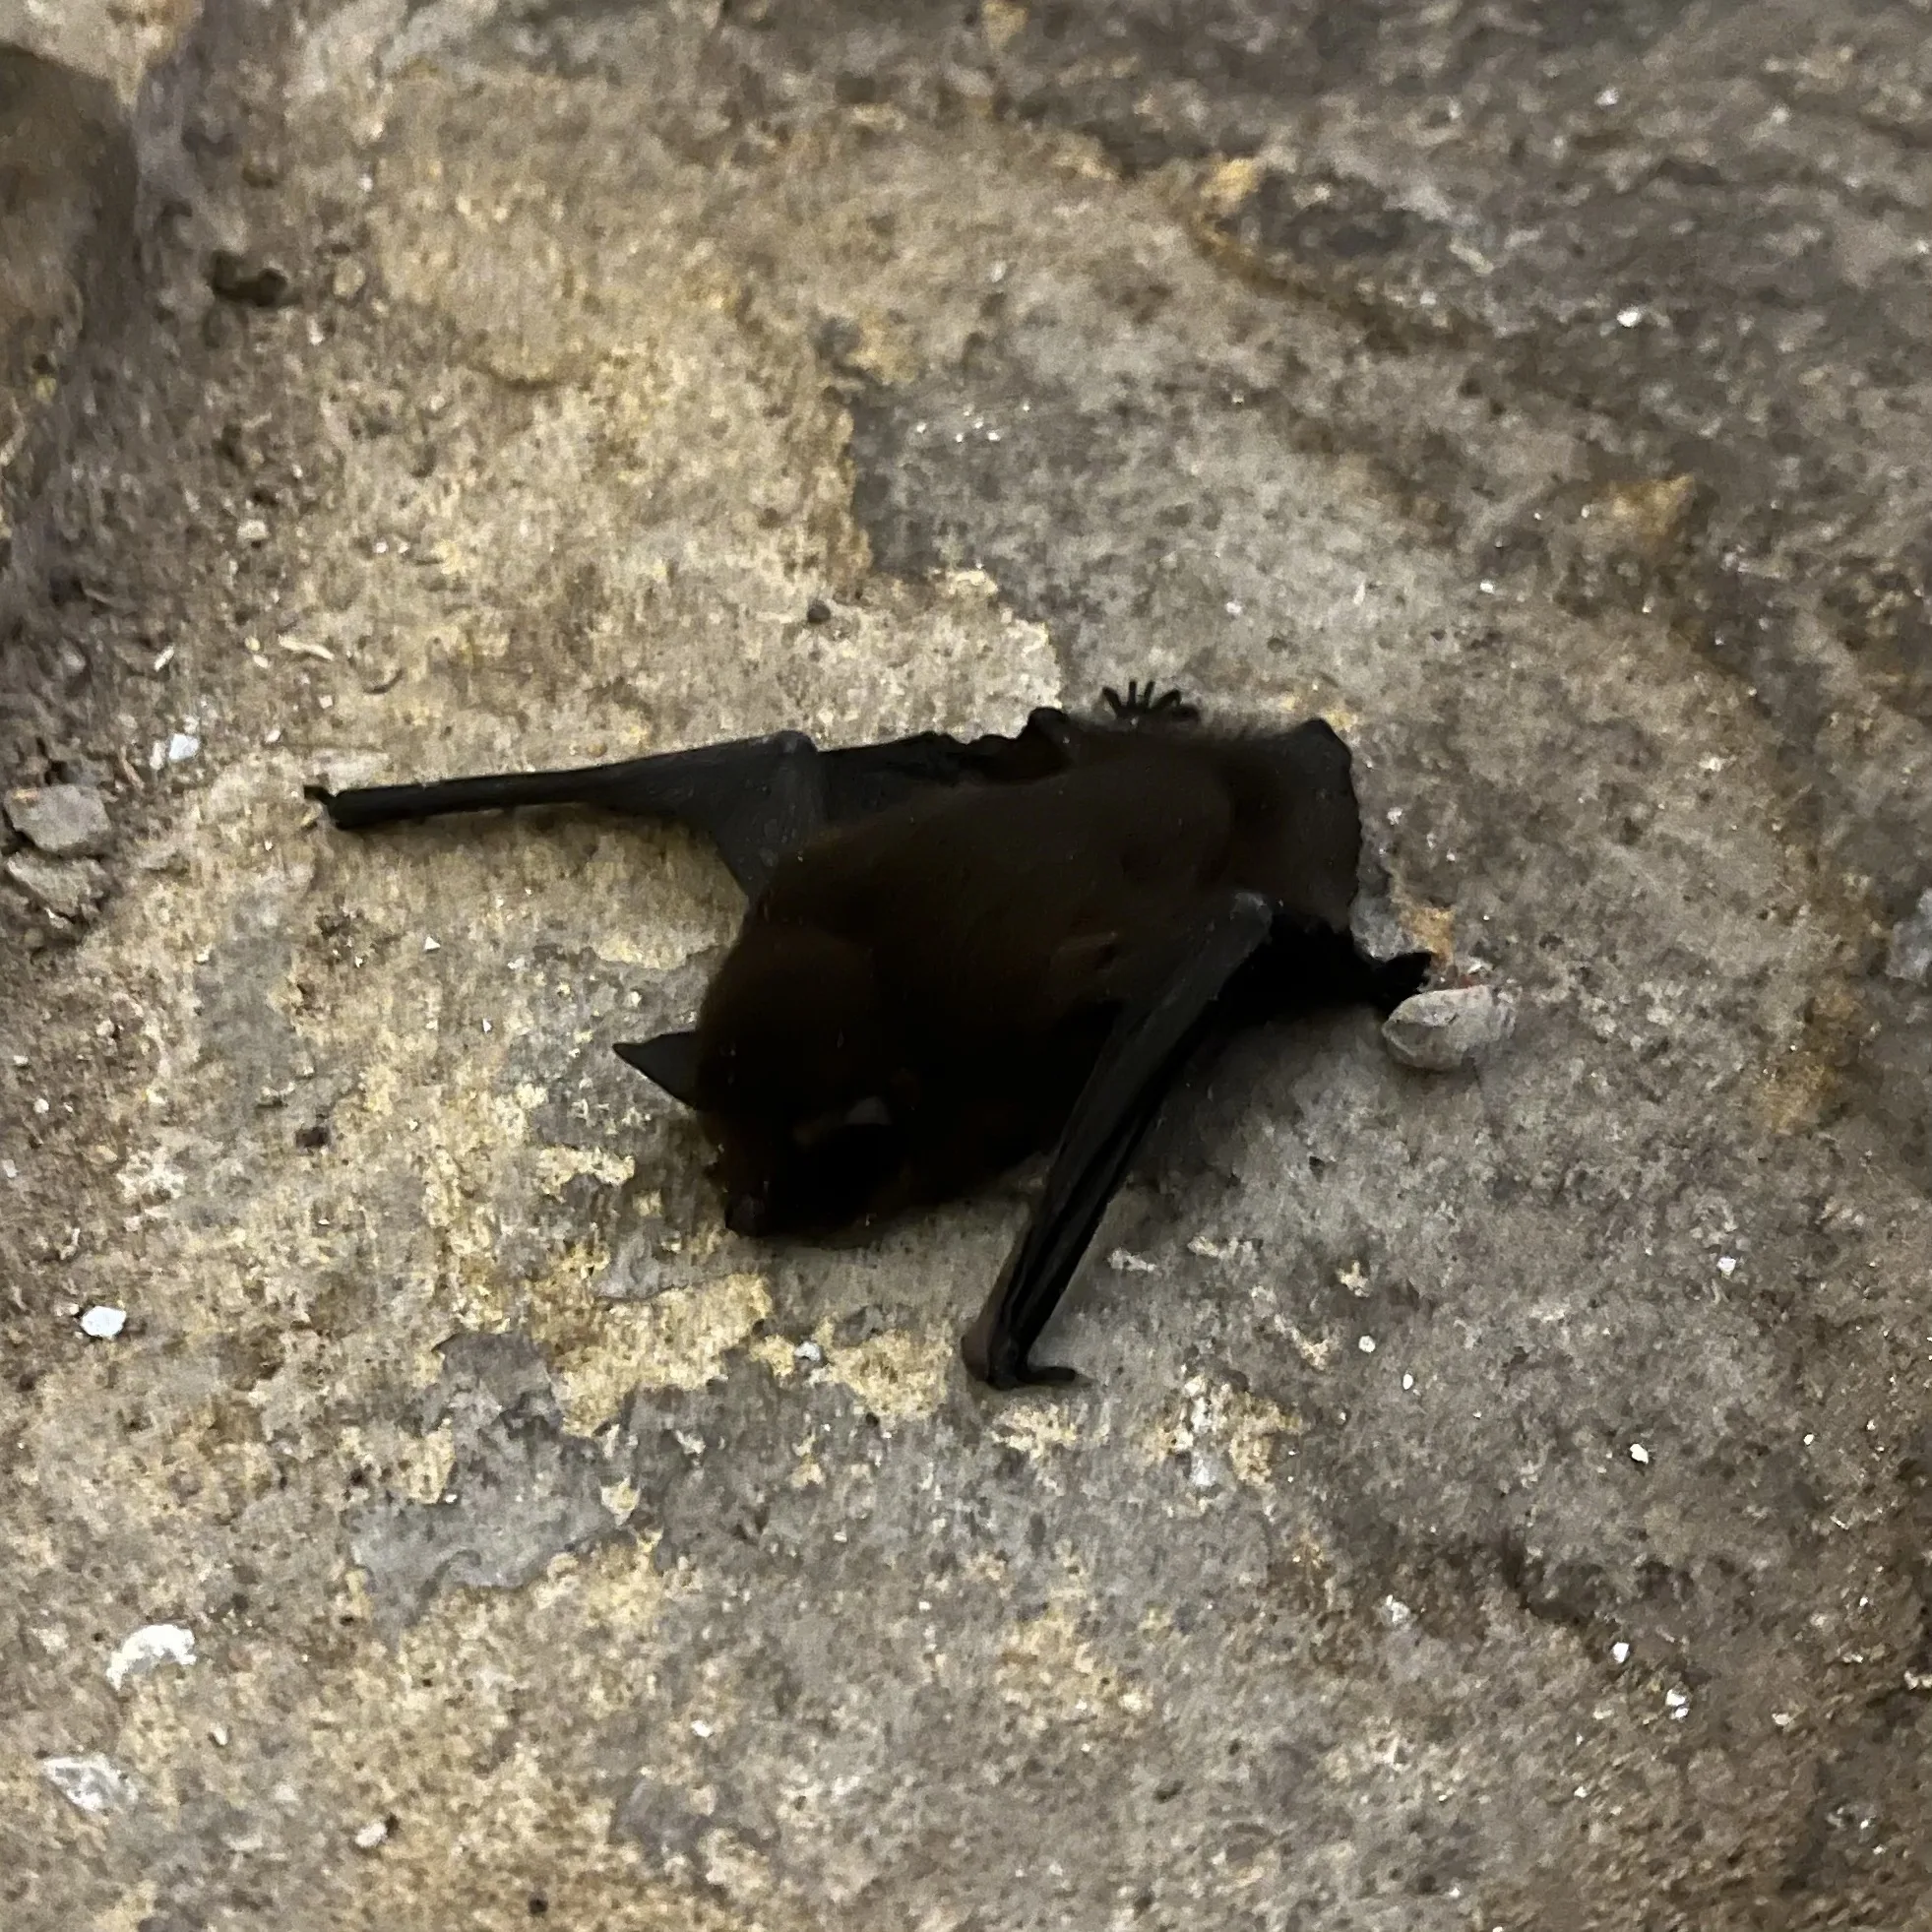 A photo of the common pipistrelle bat that we found on the floor of our cellar